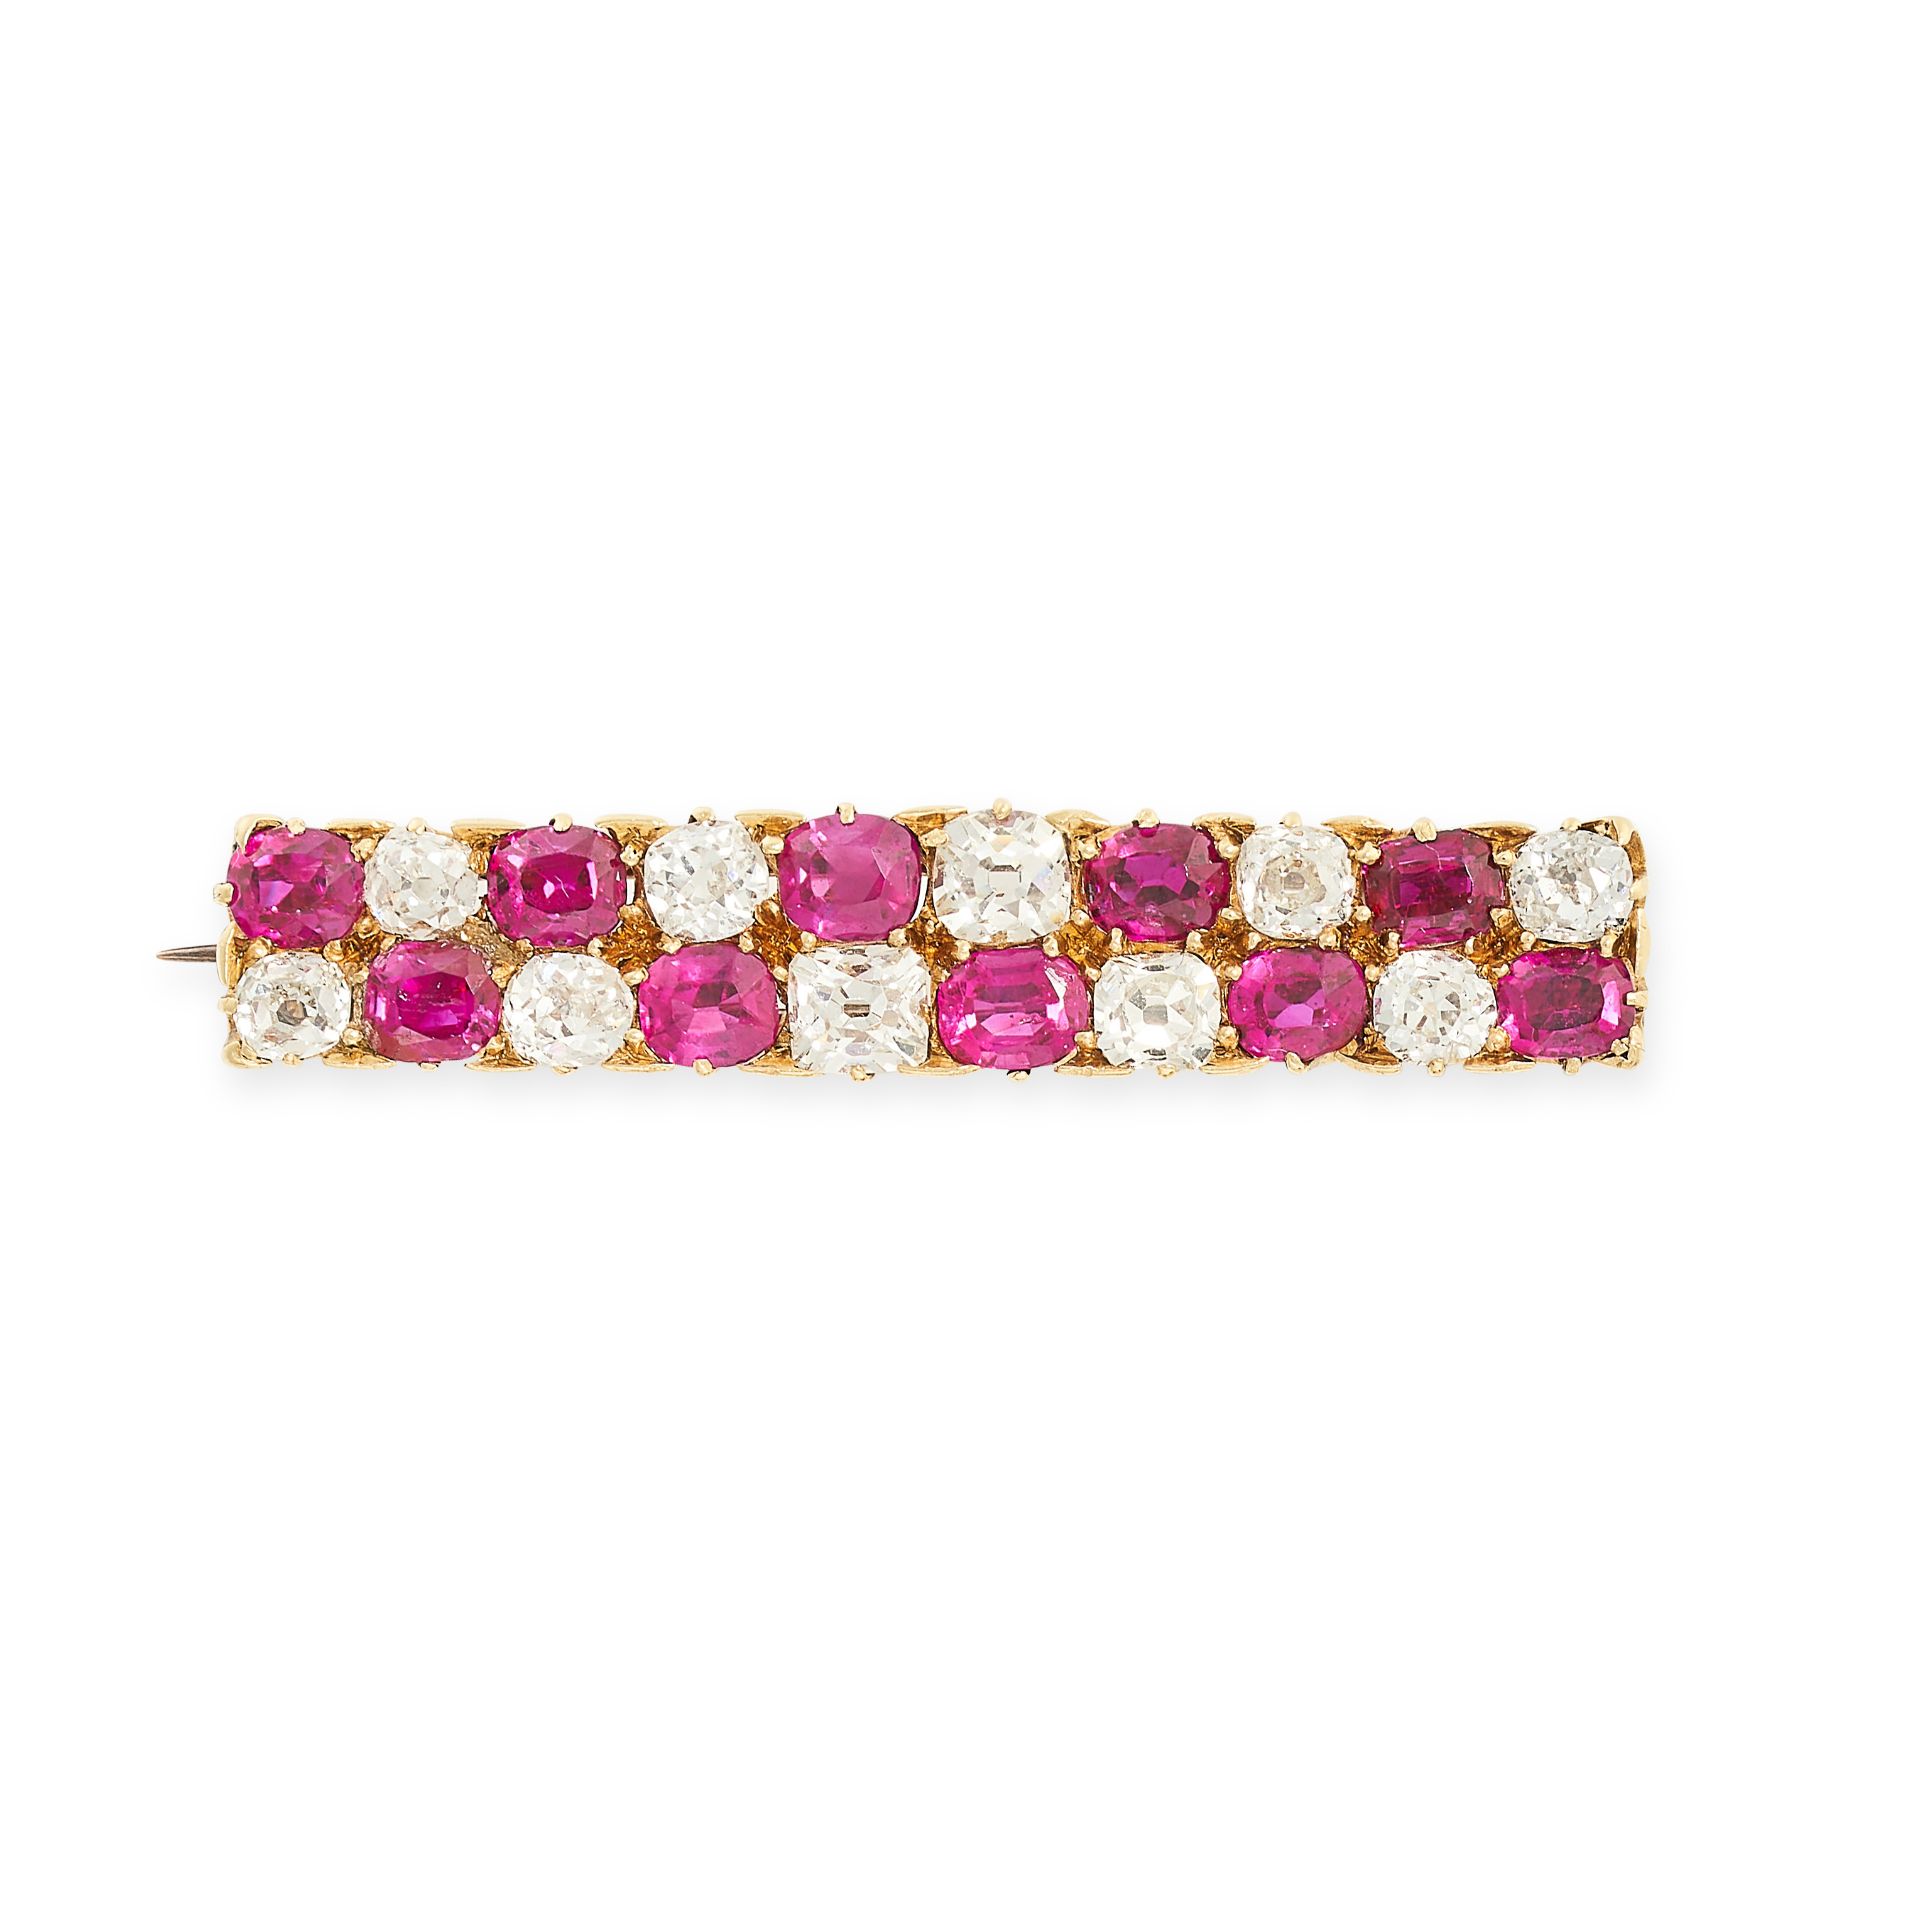 AN ANTIQUE BURMA NO HEAT RUBY AND DIAMOND BAR BROOCH in yellow gold, the rectangular face set with